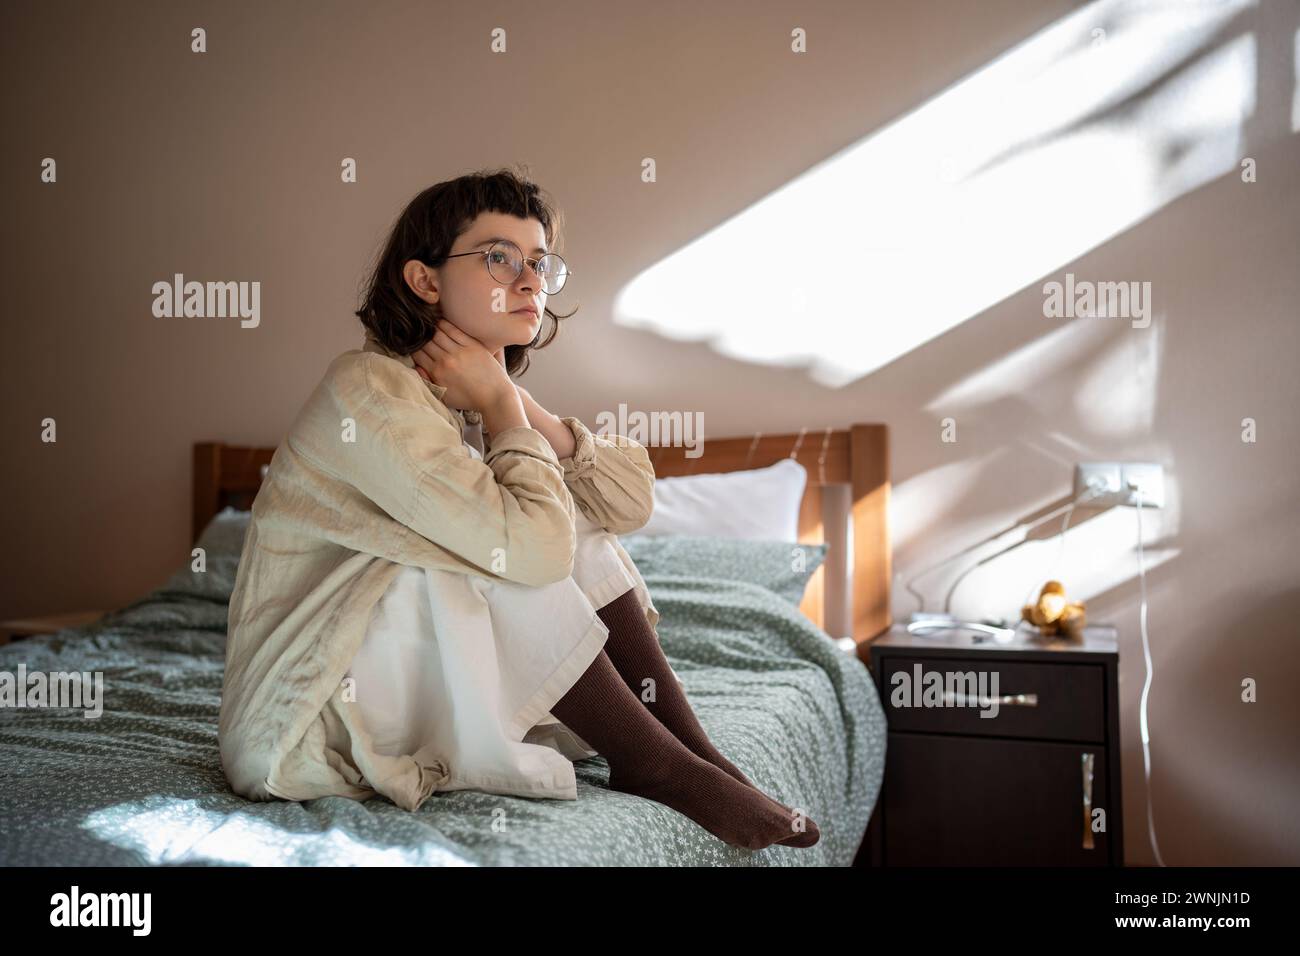 Introverted teenage girl sits on bed in apathetical mood, thinking about troubles, school bullying Stock Photo